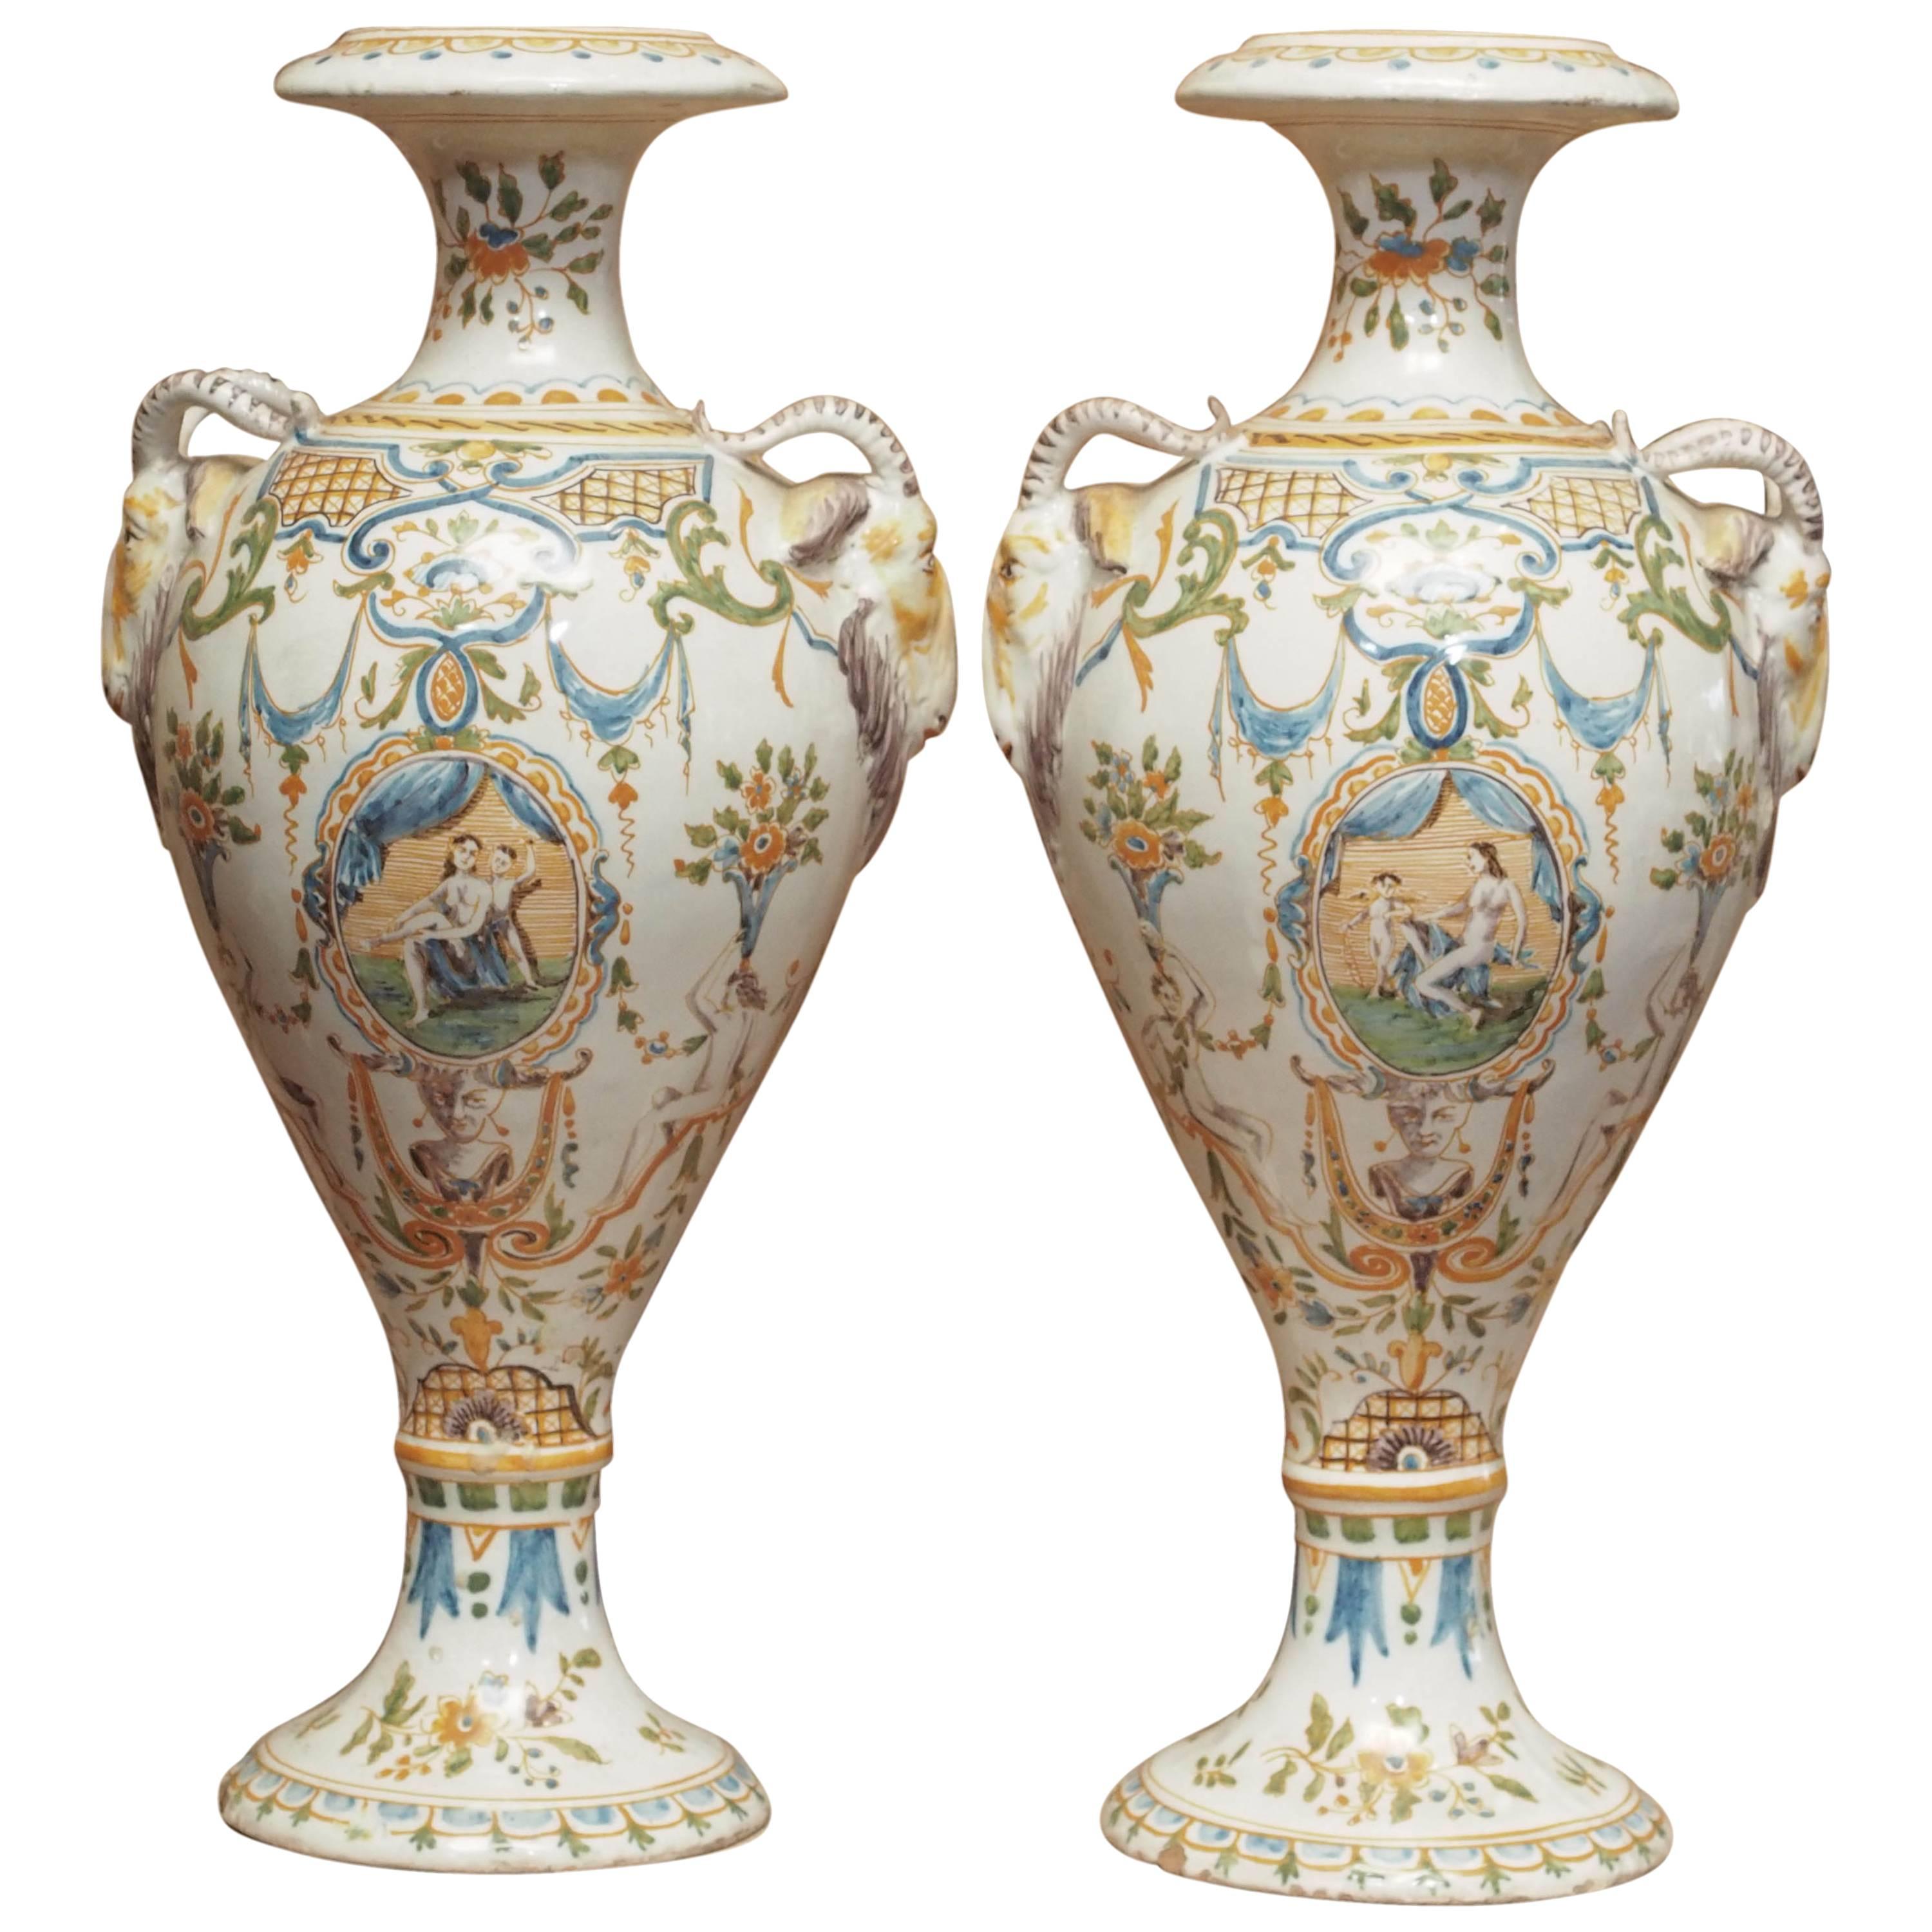 Pair of 18th Century Signed Moustier Urns For Sale